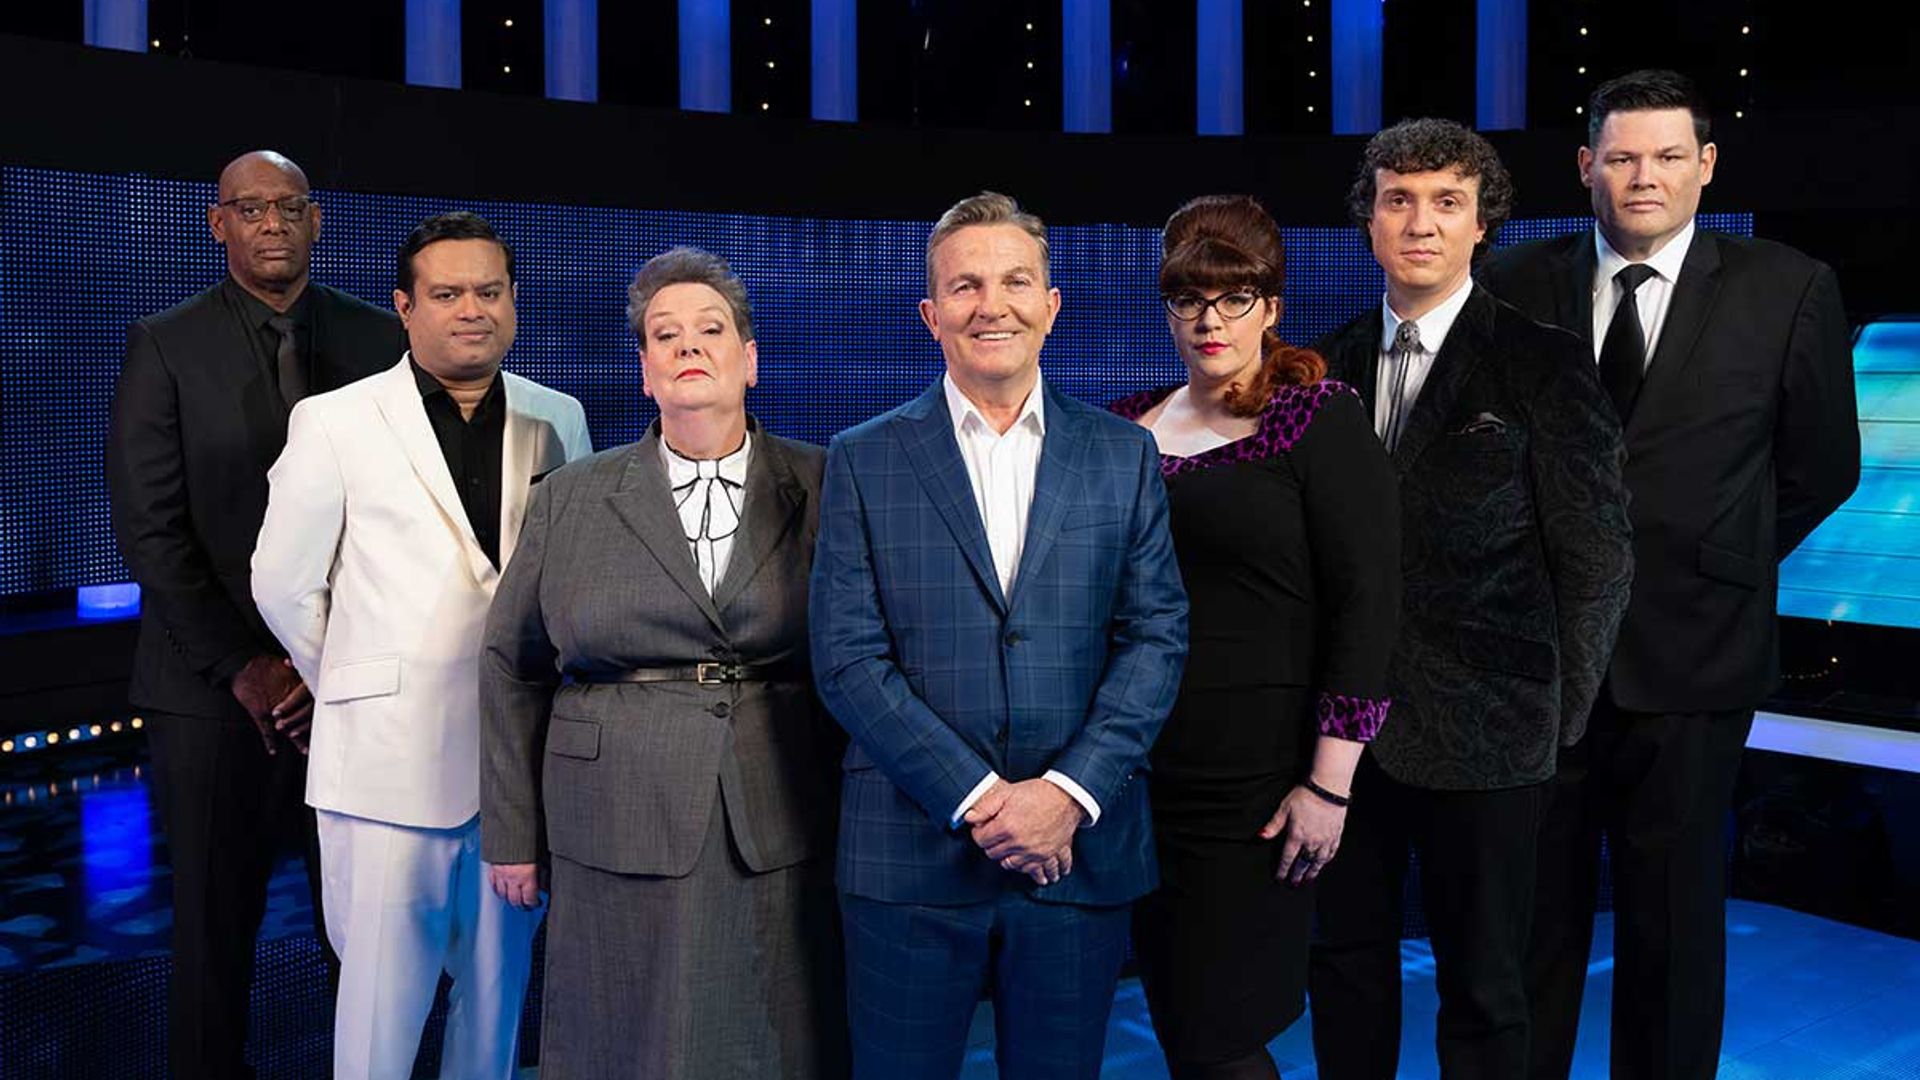 The Chase star speaks out after storming off show amid mental health